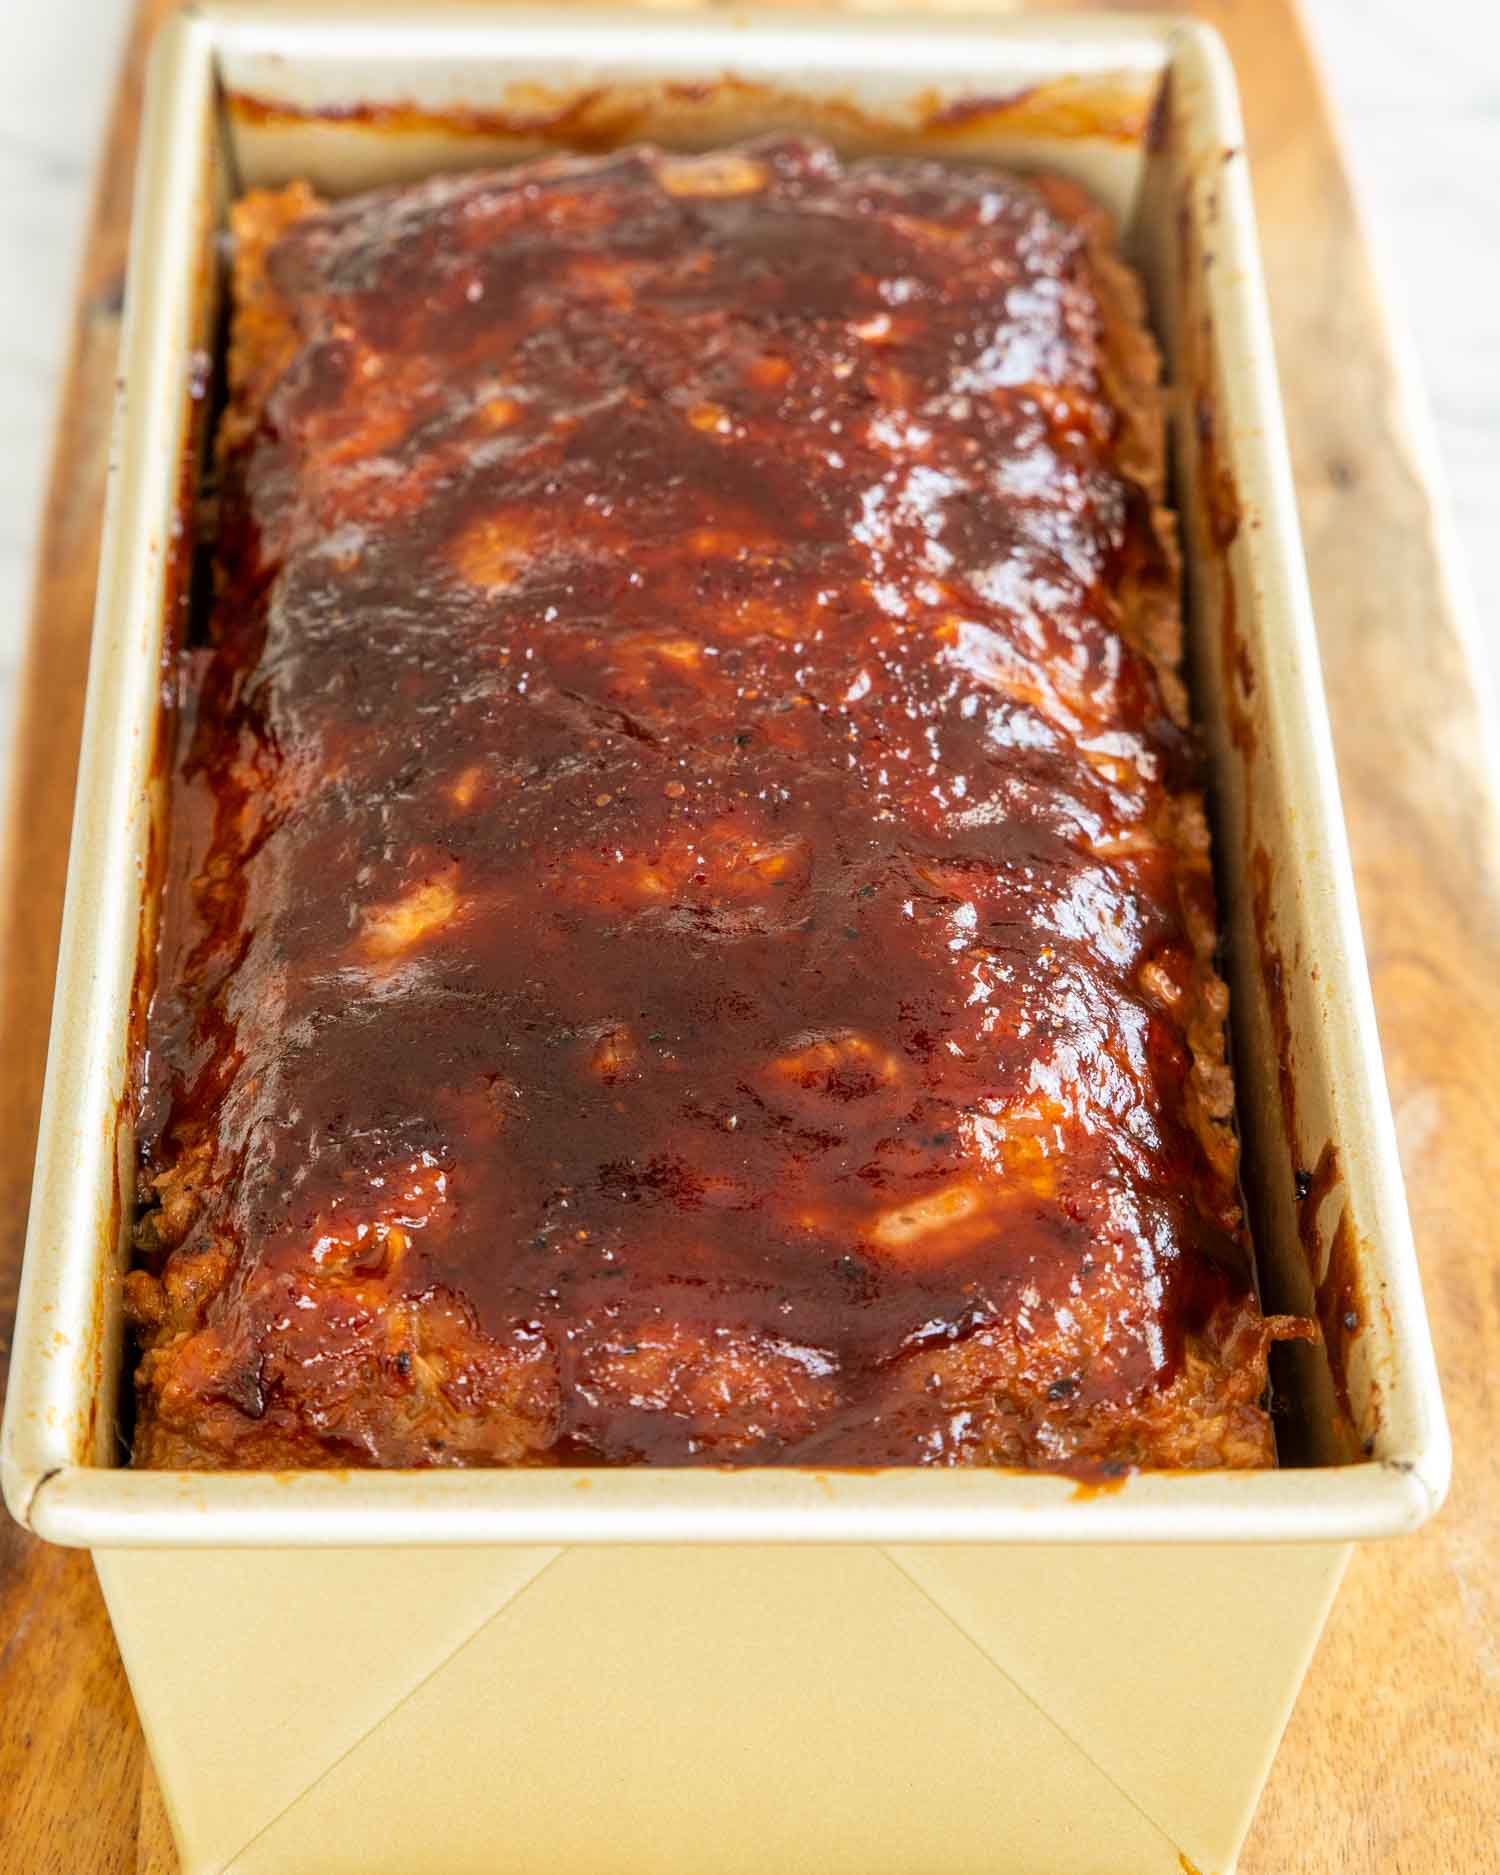 a meatloaf with bbq sauce in a loaf pan fresh out of the oven.